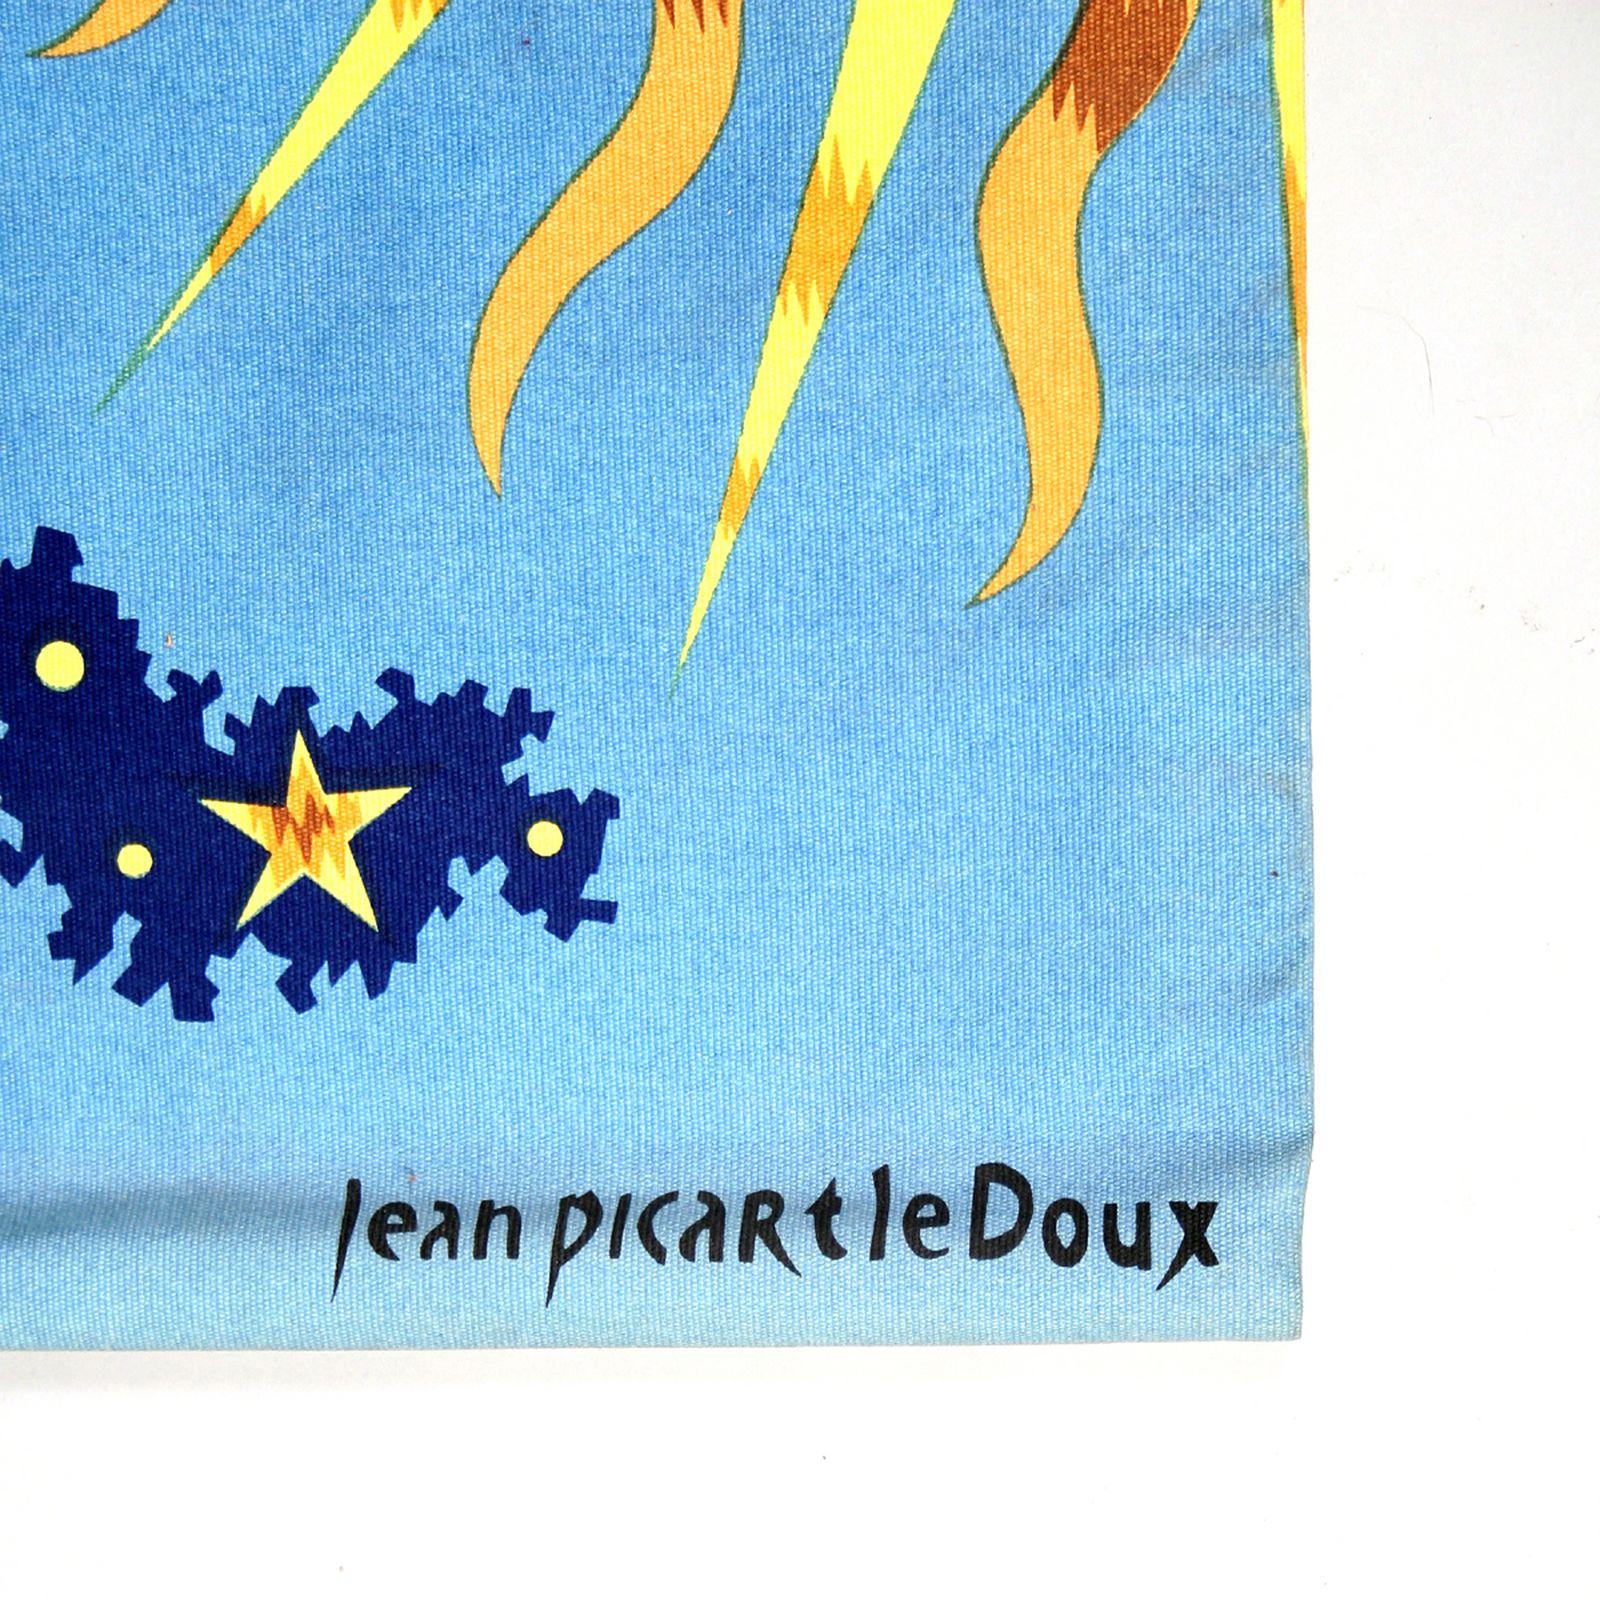 This is a stunning tapestry by the well-known tapestry maker Jean Picart le Doux. It is signed on the bottom right hand side. The tapestry is named 'Homage a Paul Eluard 'on the label at the back It is currently unframed and hangs from concealed